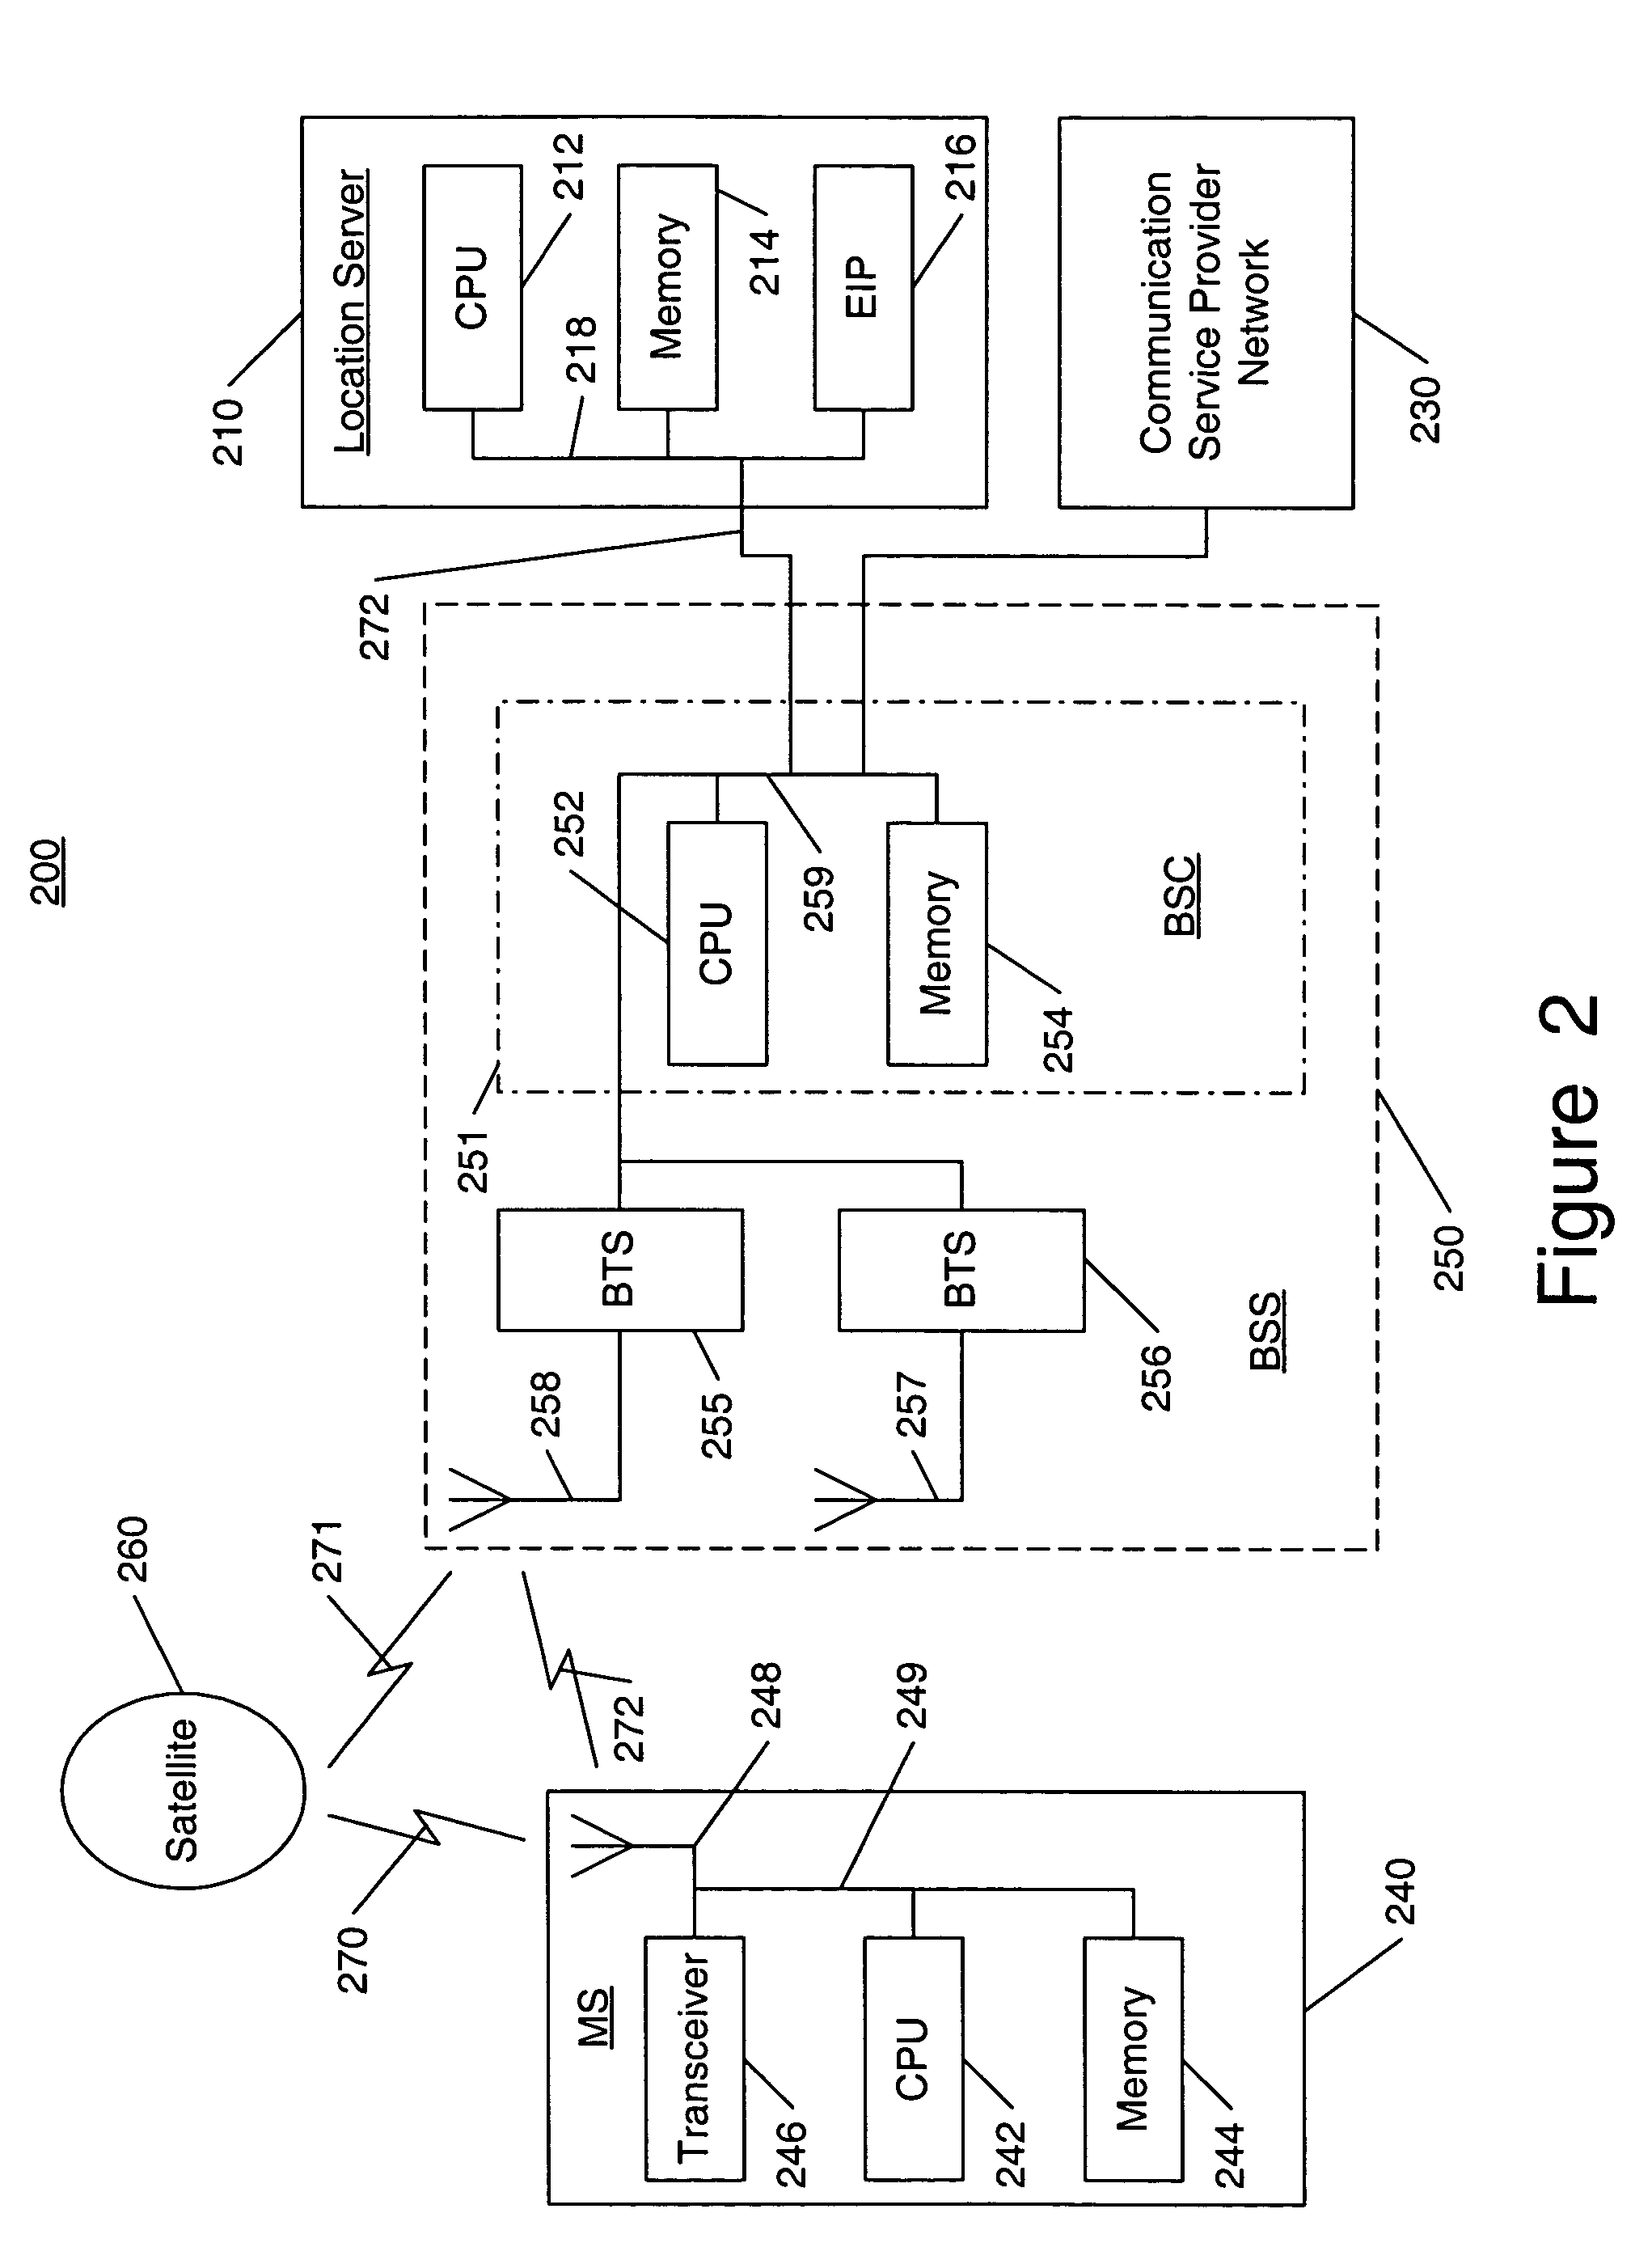 System and method for using equipment identity information in providing location services to a wireless communication device